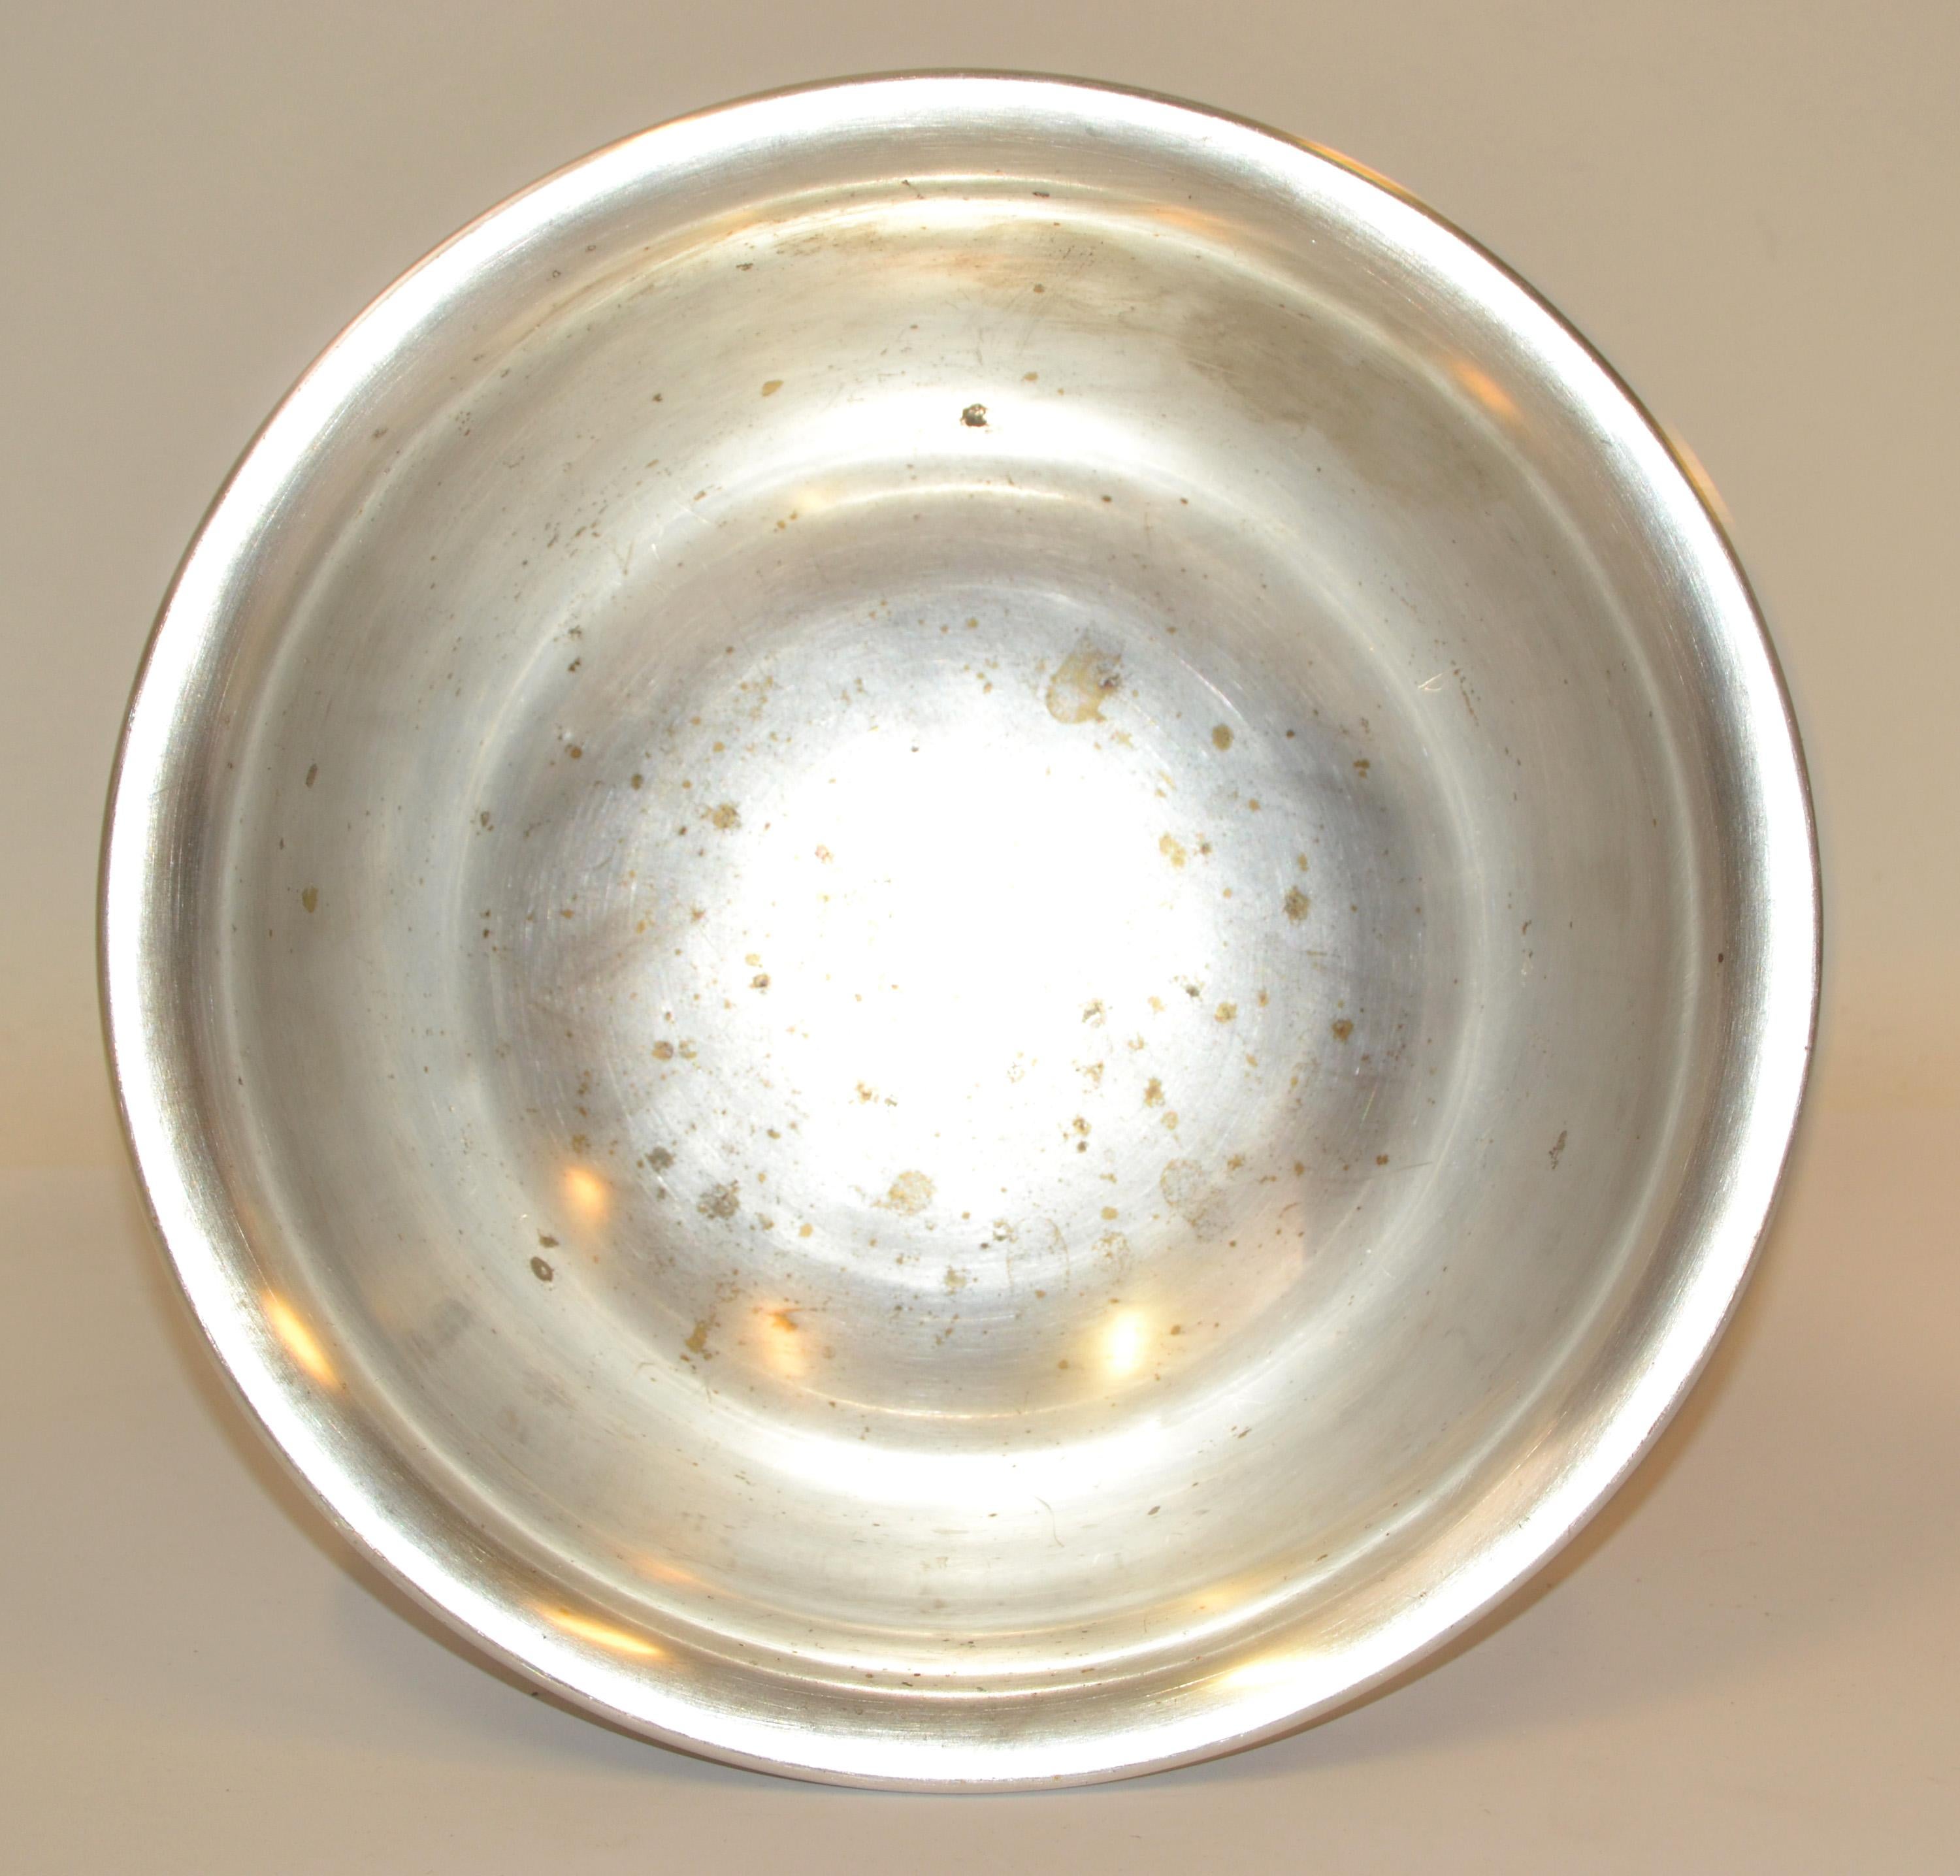 1950th Poole Silver Company produced Art Deco footed Bowl and designed by Paul Revere.
This is the 8 inches diameter bow with a base of 5.5 inches diameter.
Stamped at the base Poole Silver Company, Authentic Reproduction and numbered 502 8. 
In